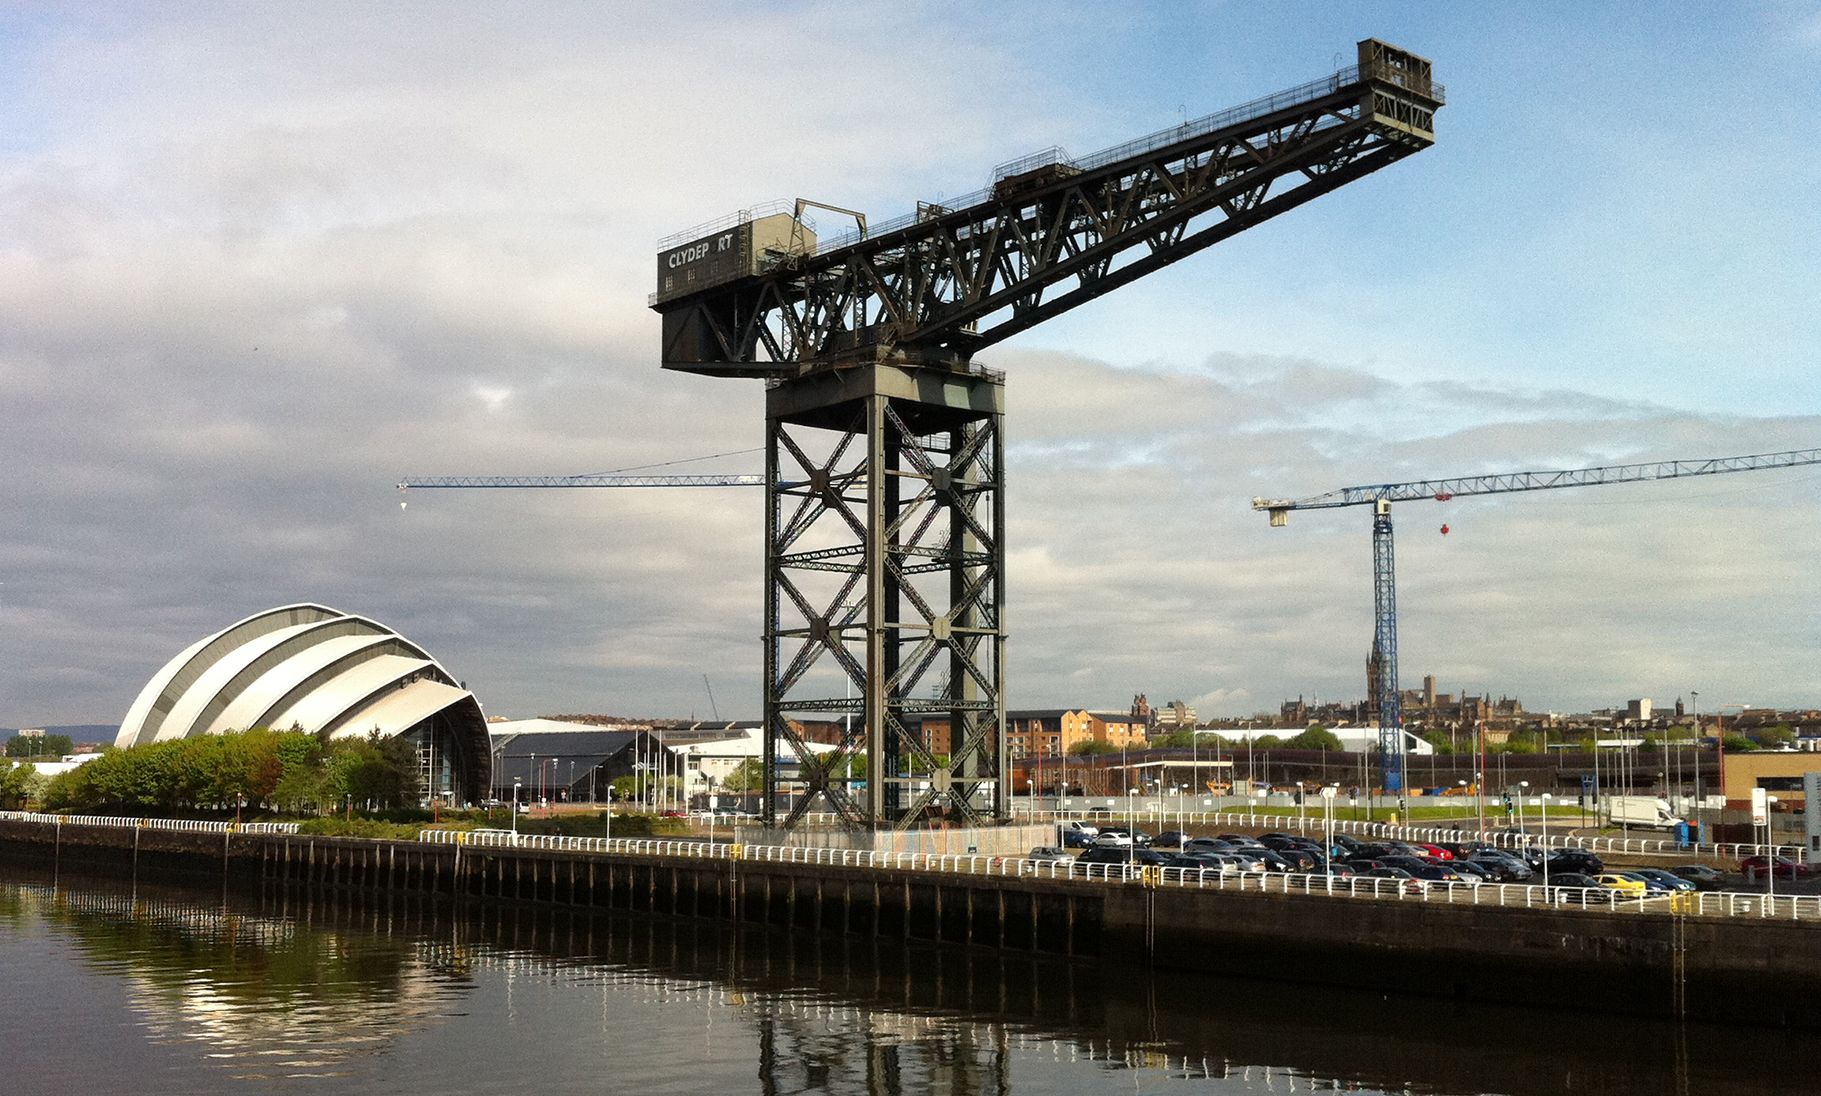 The shipyard crane at Finnieston on the River Clyde